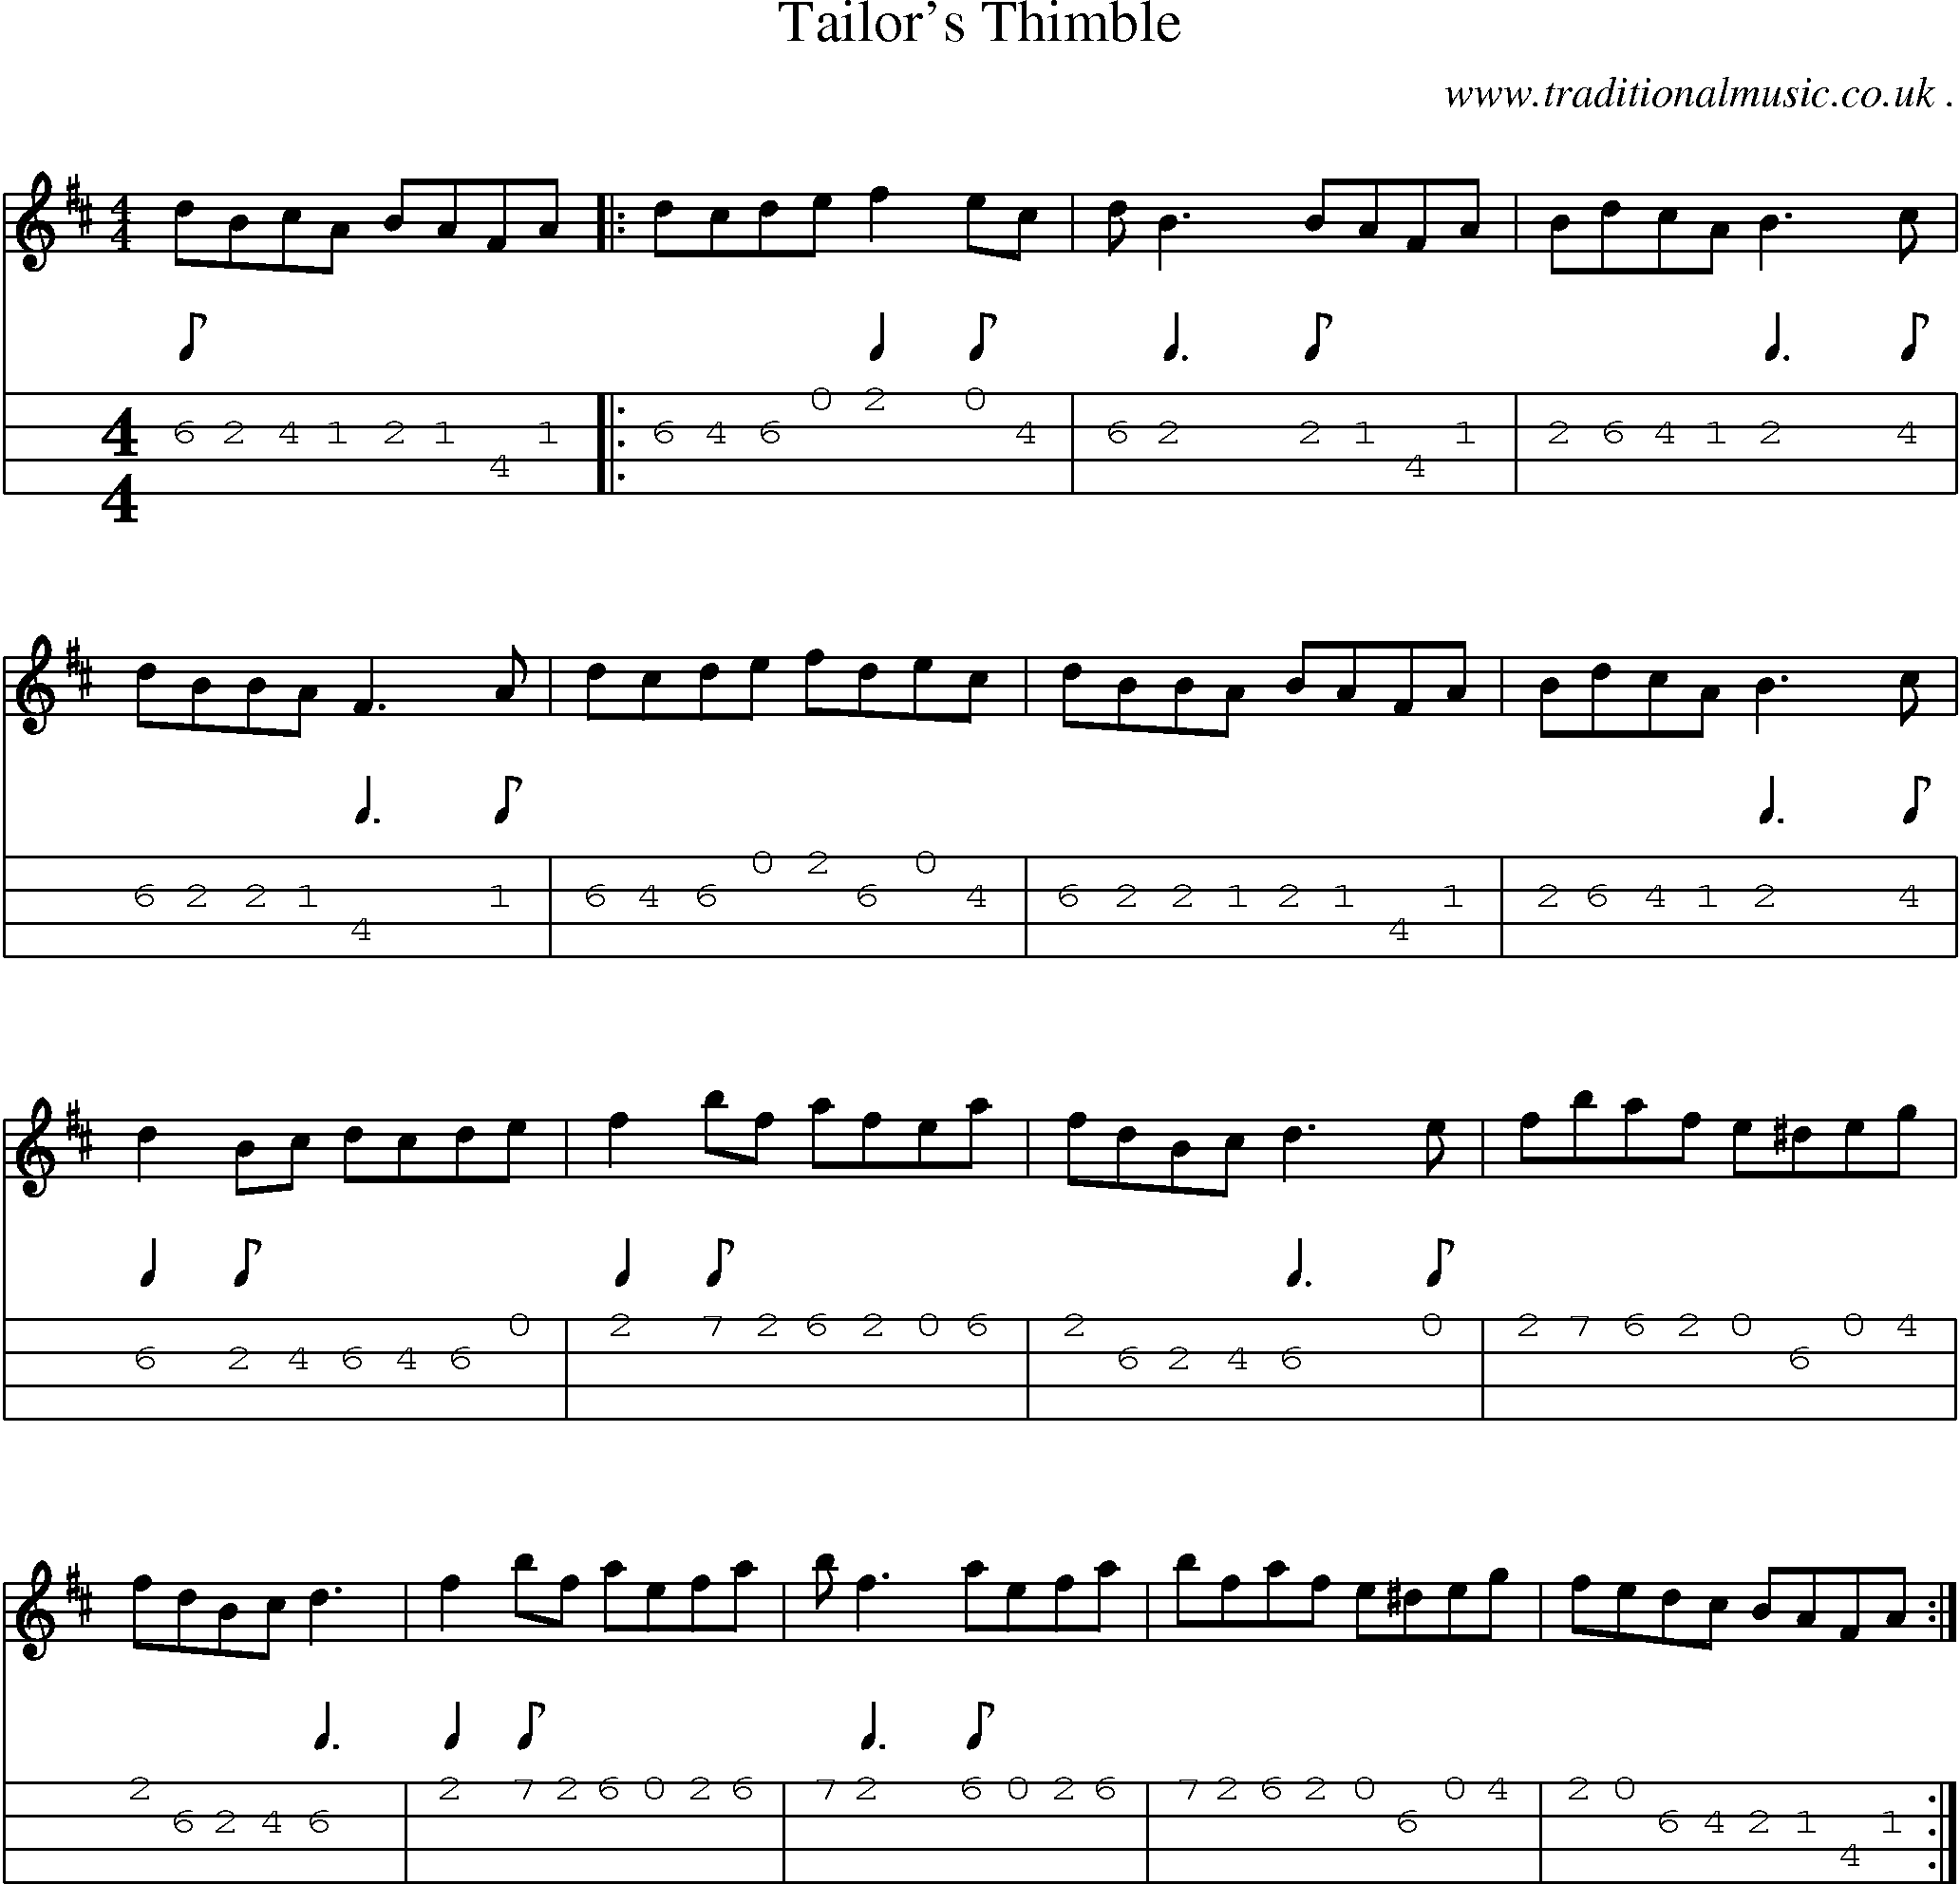 Sheet-Music and Mandolin Tabs for Tailors Thimble